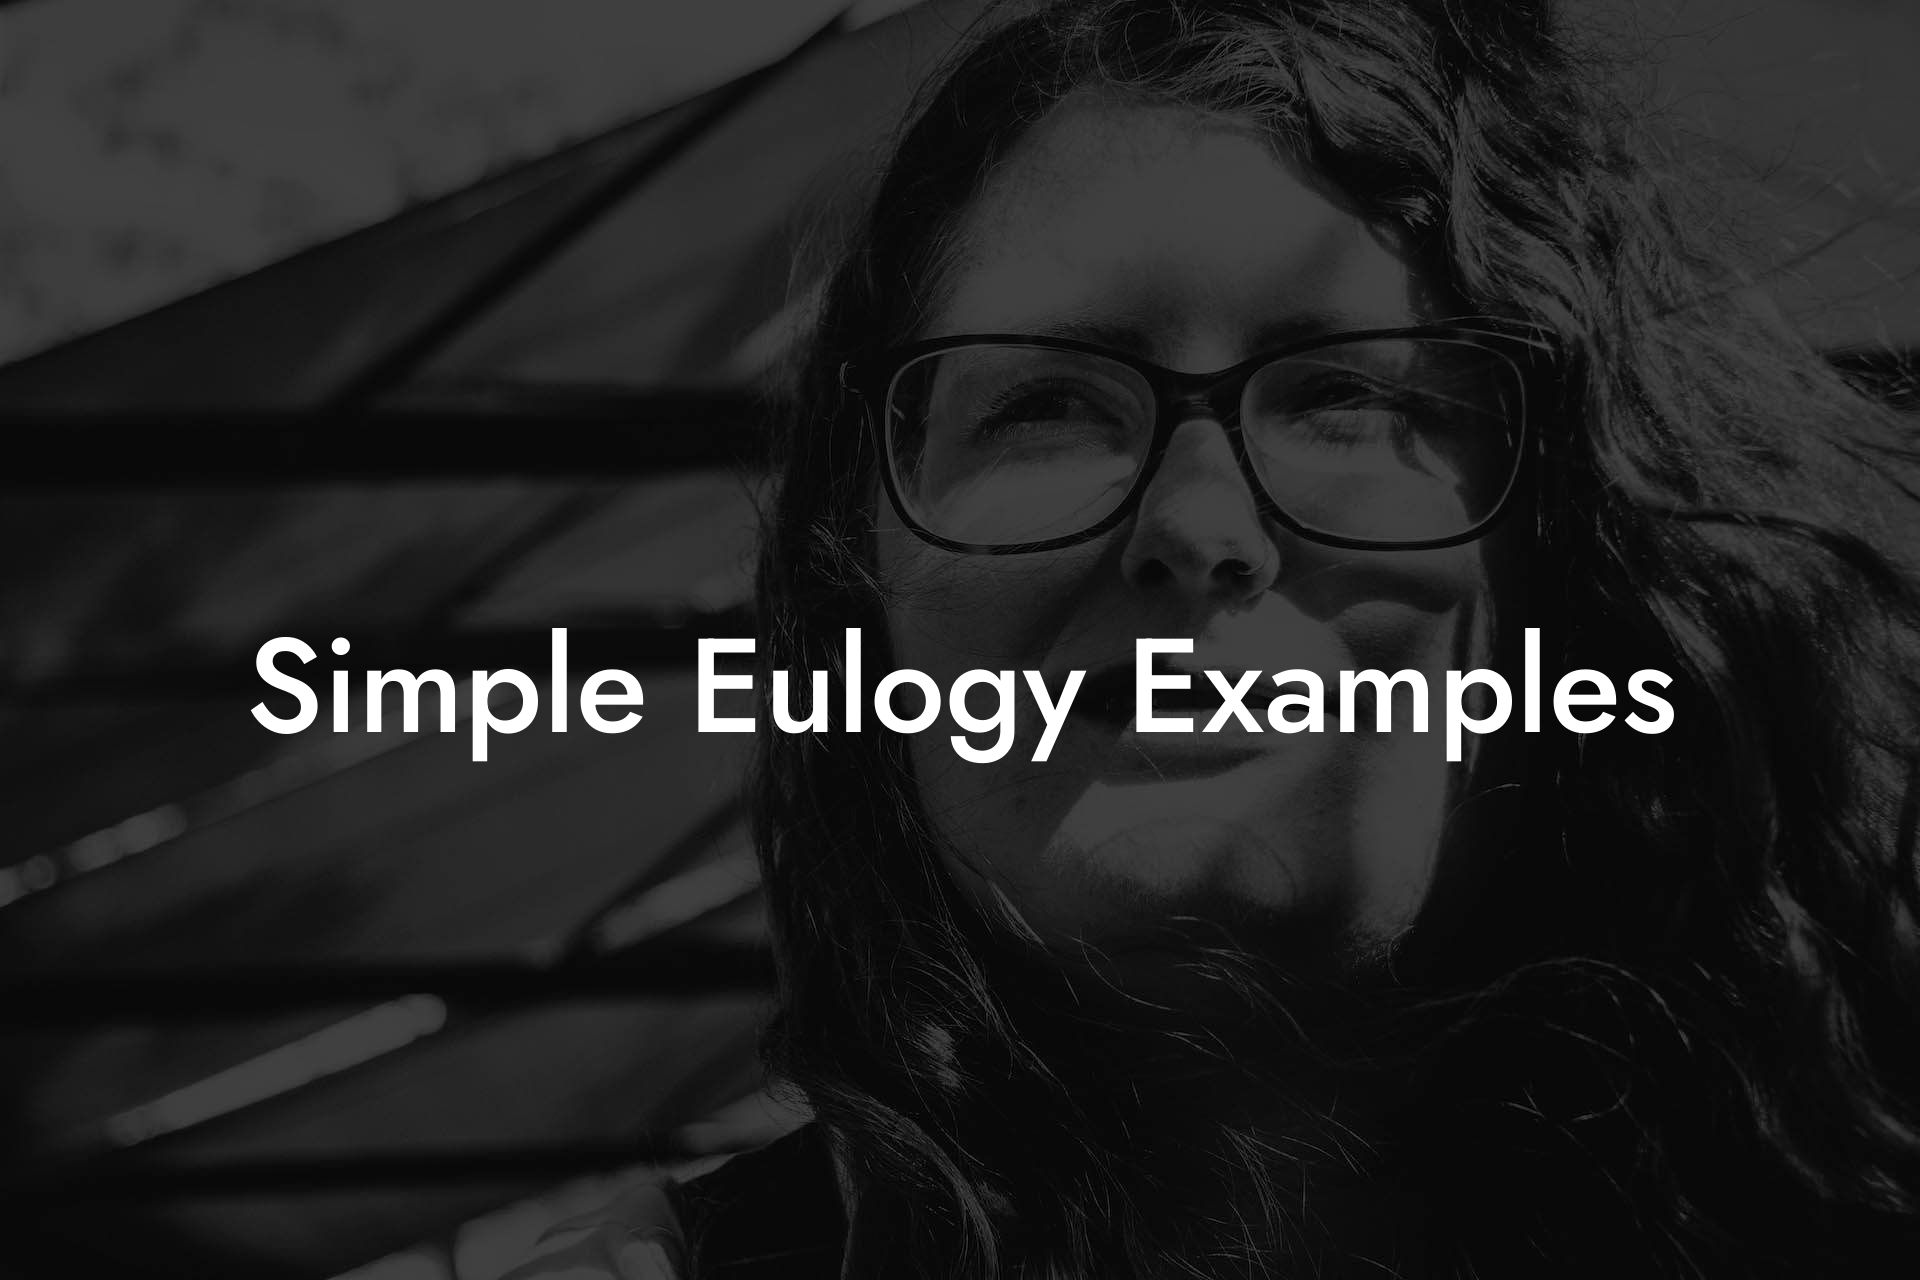 Simple Eulogy Examples